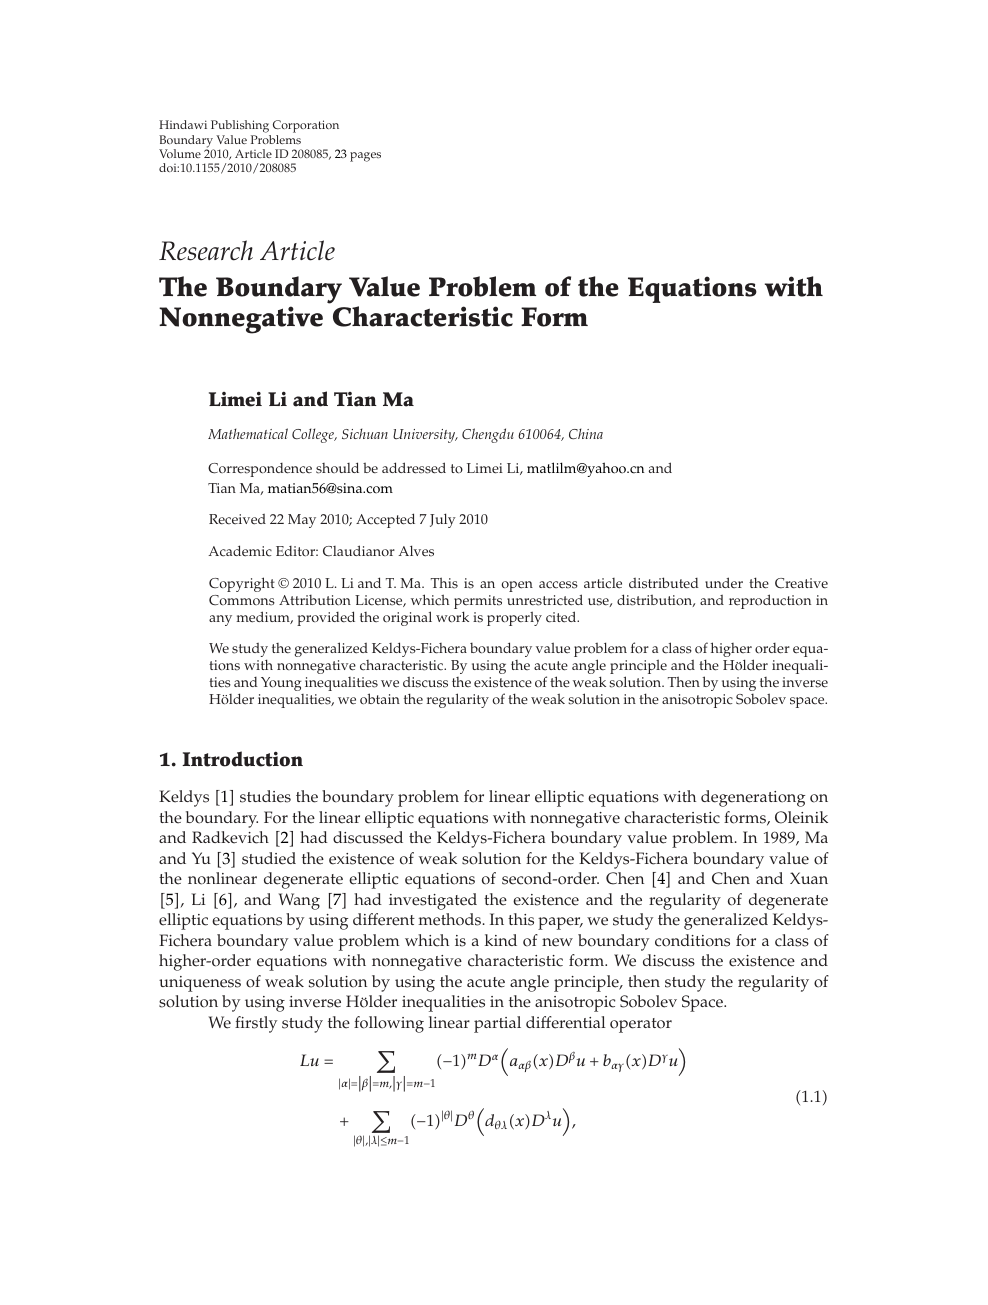 The Boundary Value Problem Of The Equations With Nonnegative Characteristic Form Topic Of Research Paper In Mathematics Download Scholarly Article Pdf And Read For Free On Cyberleninka Open Science Hub